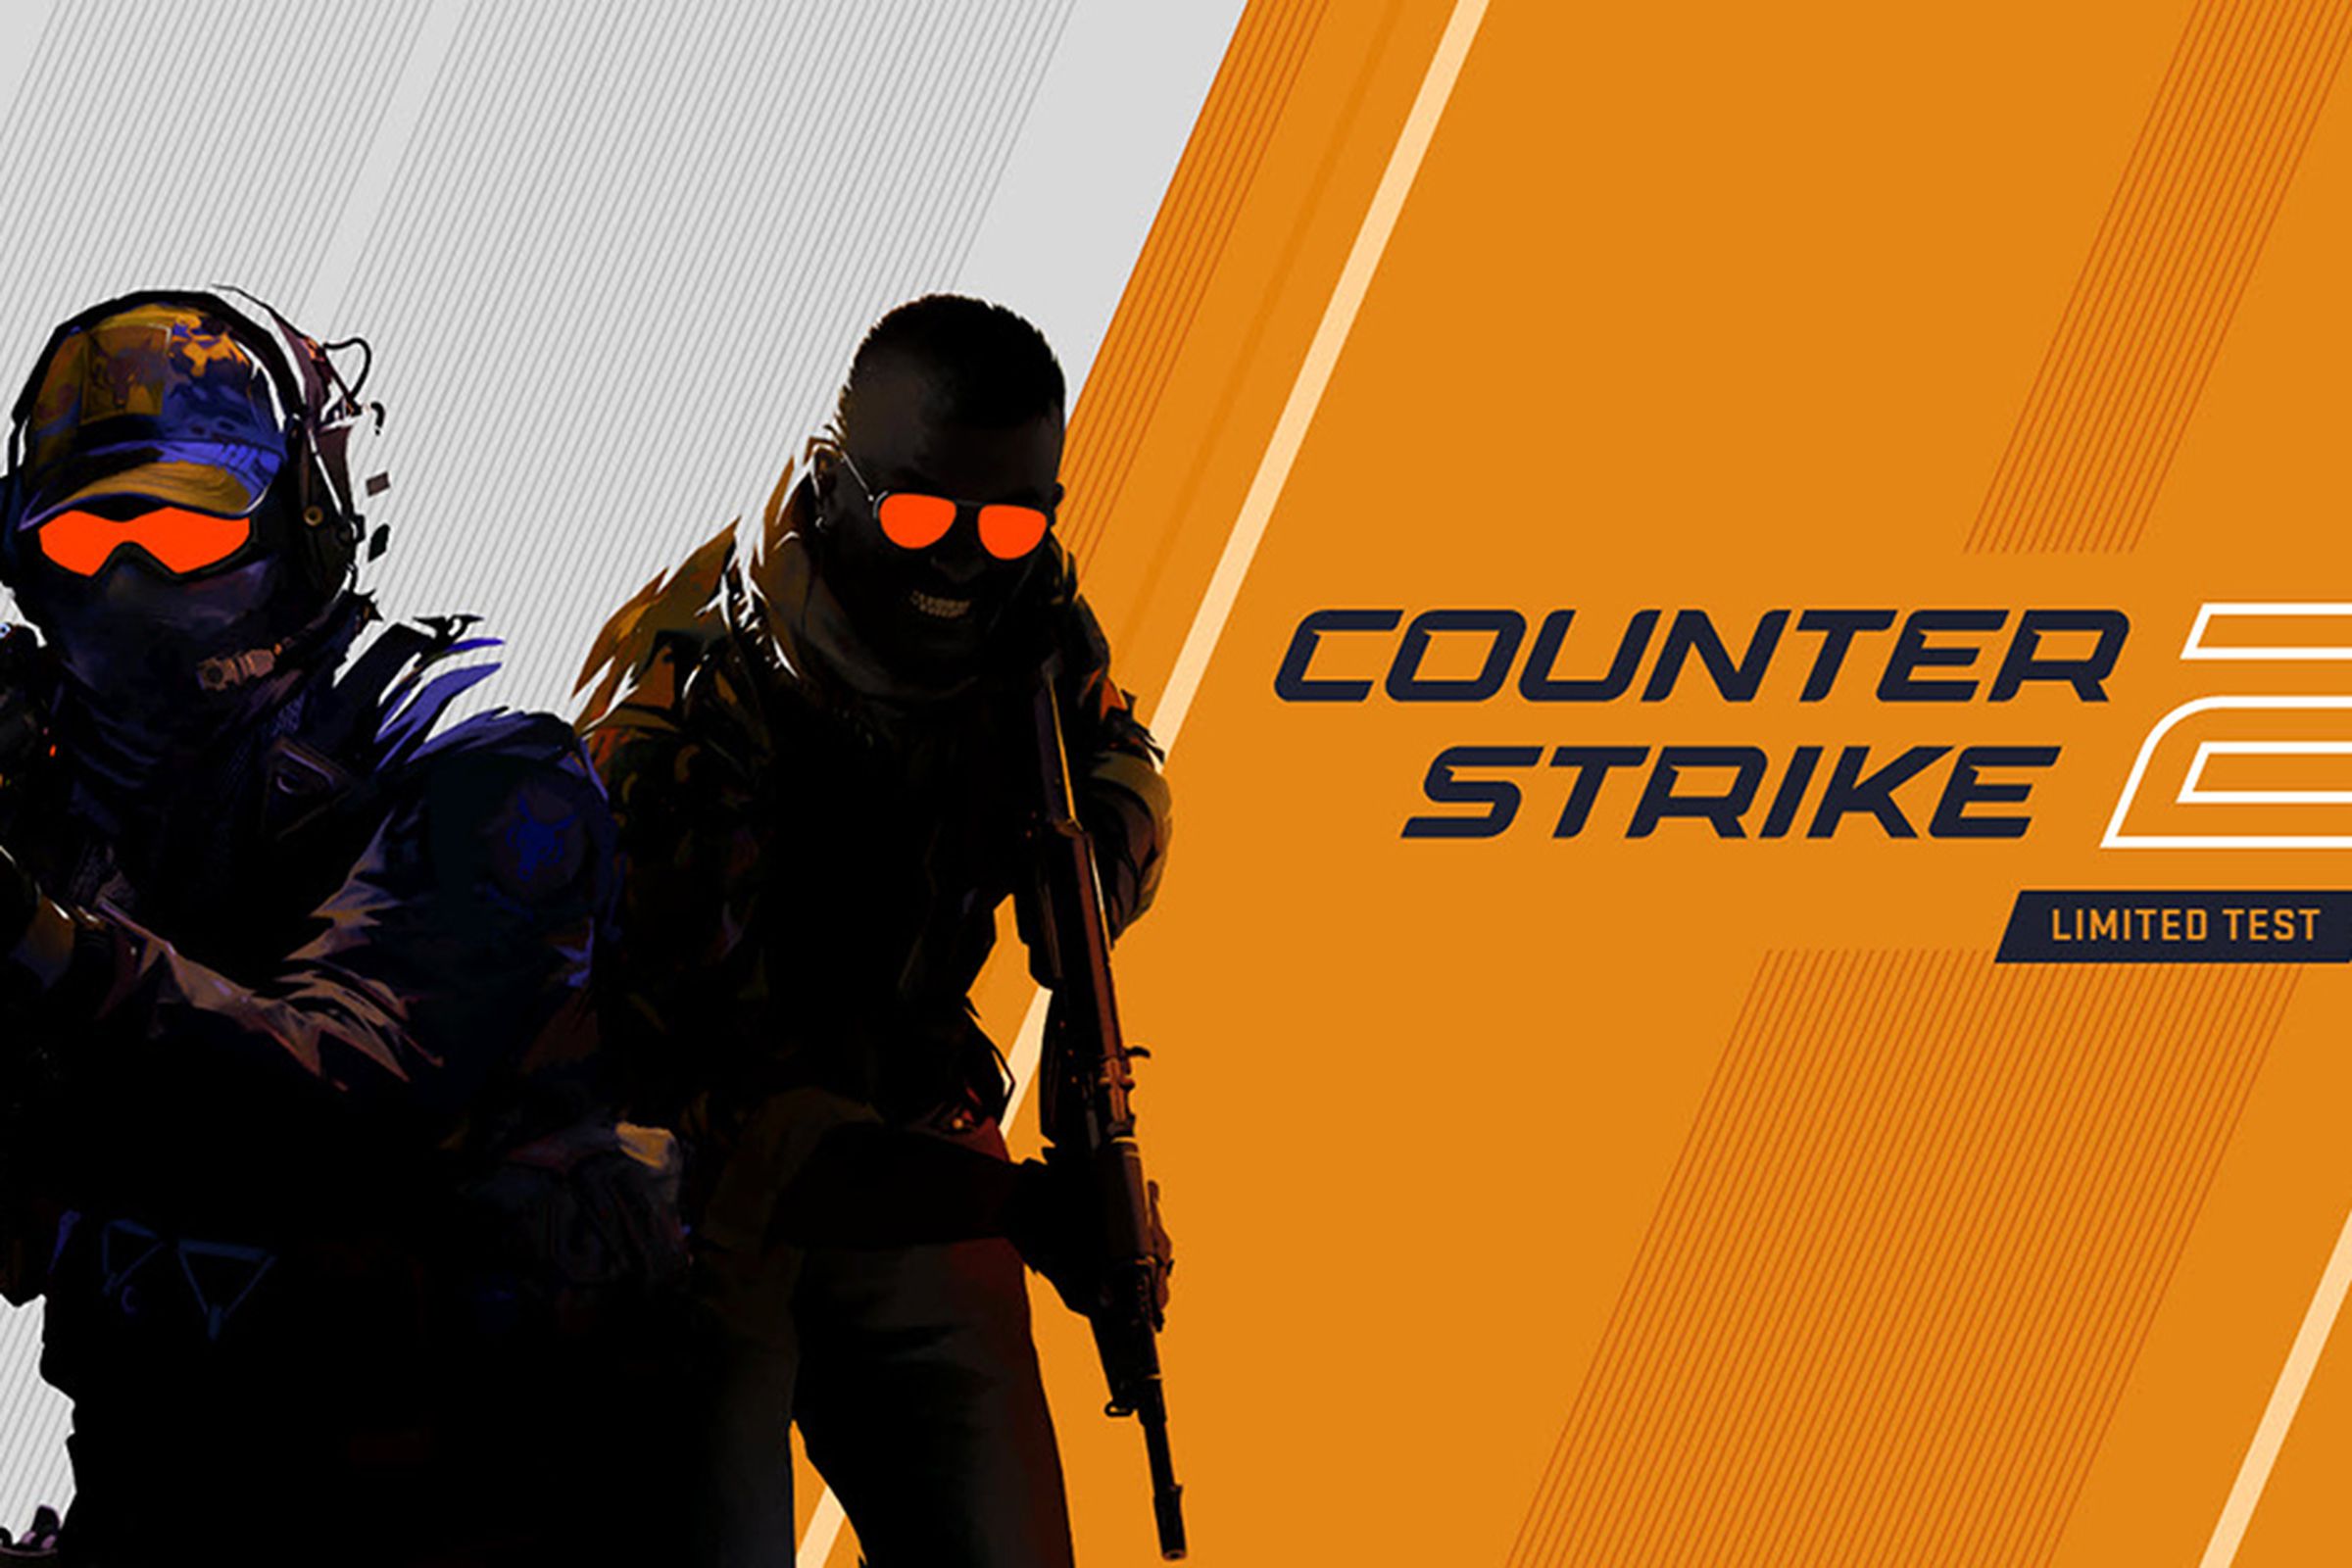 Illustration of Counter-Strike 2 players